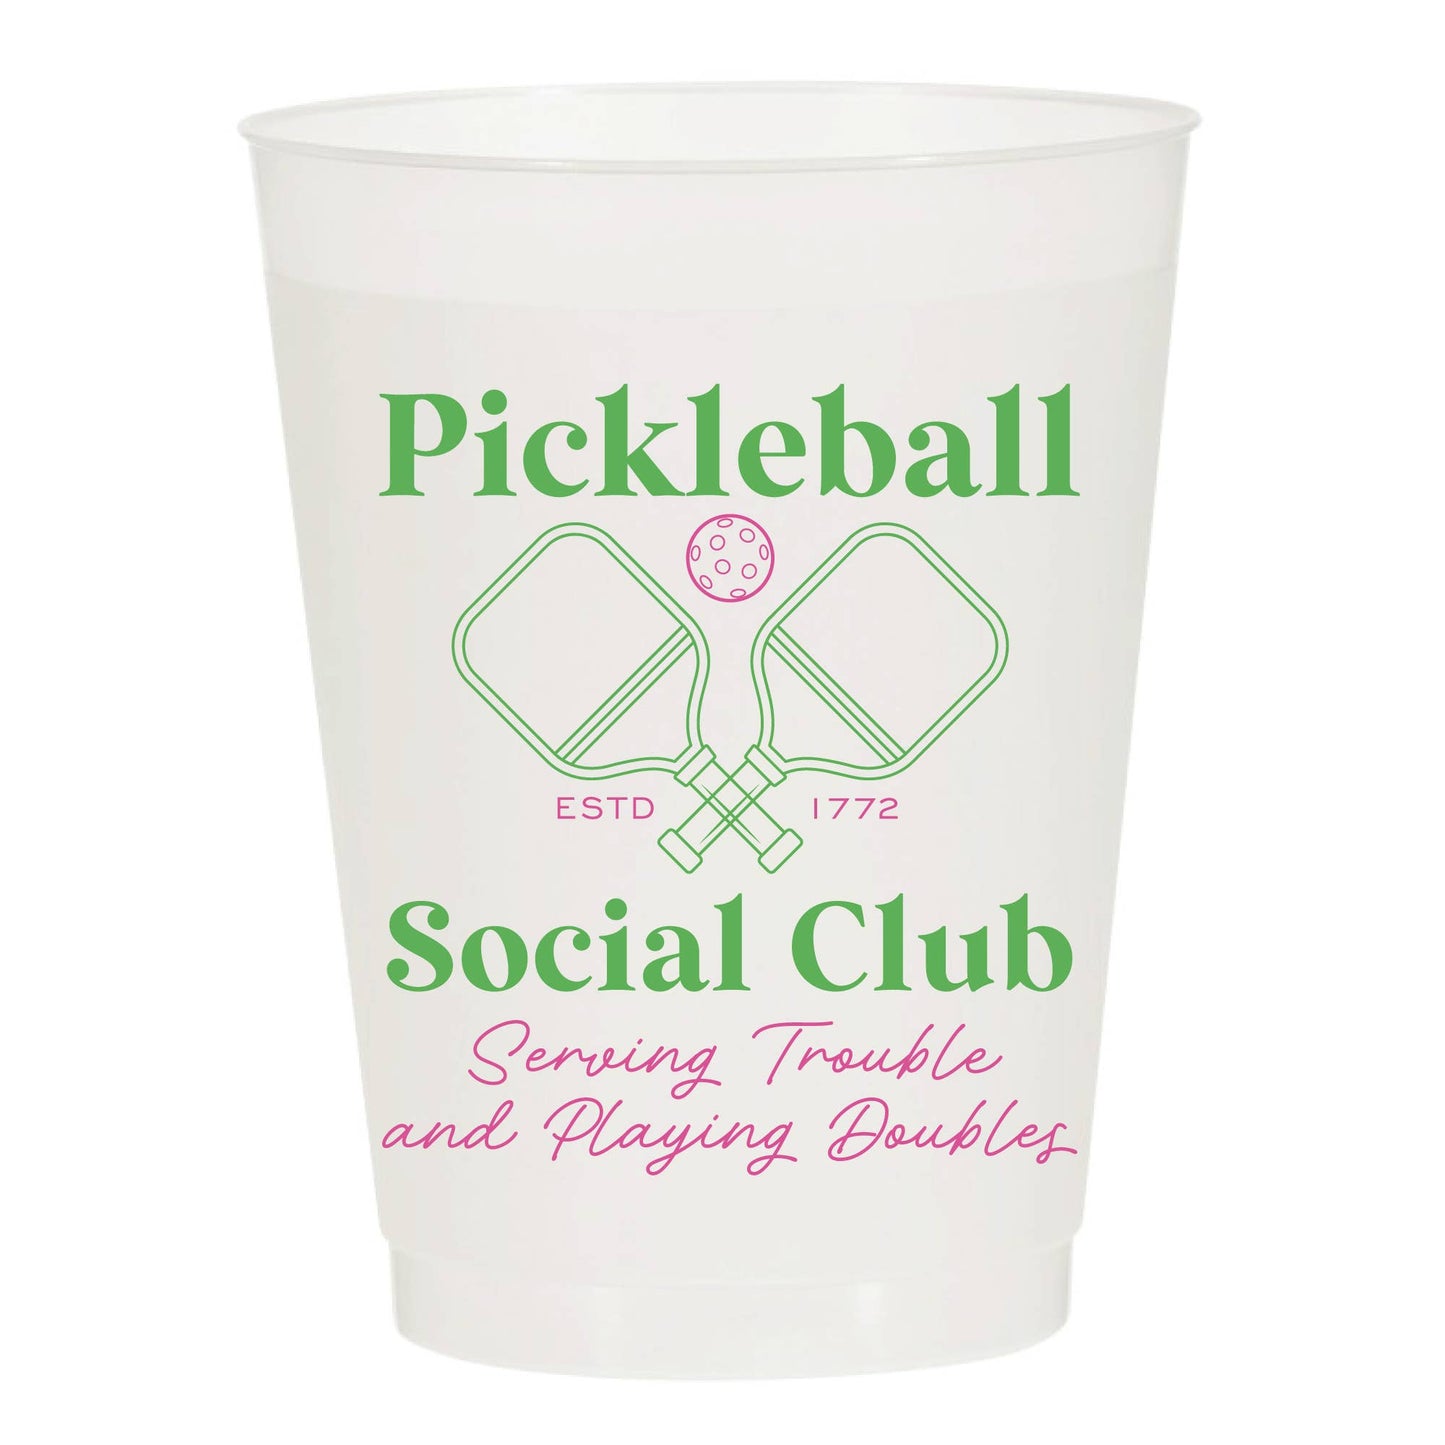 Sip Hip Hooray - Pickleball Social Club Trouble Double Set of 10 Reusable Cup